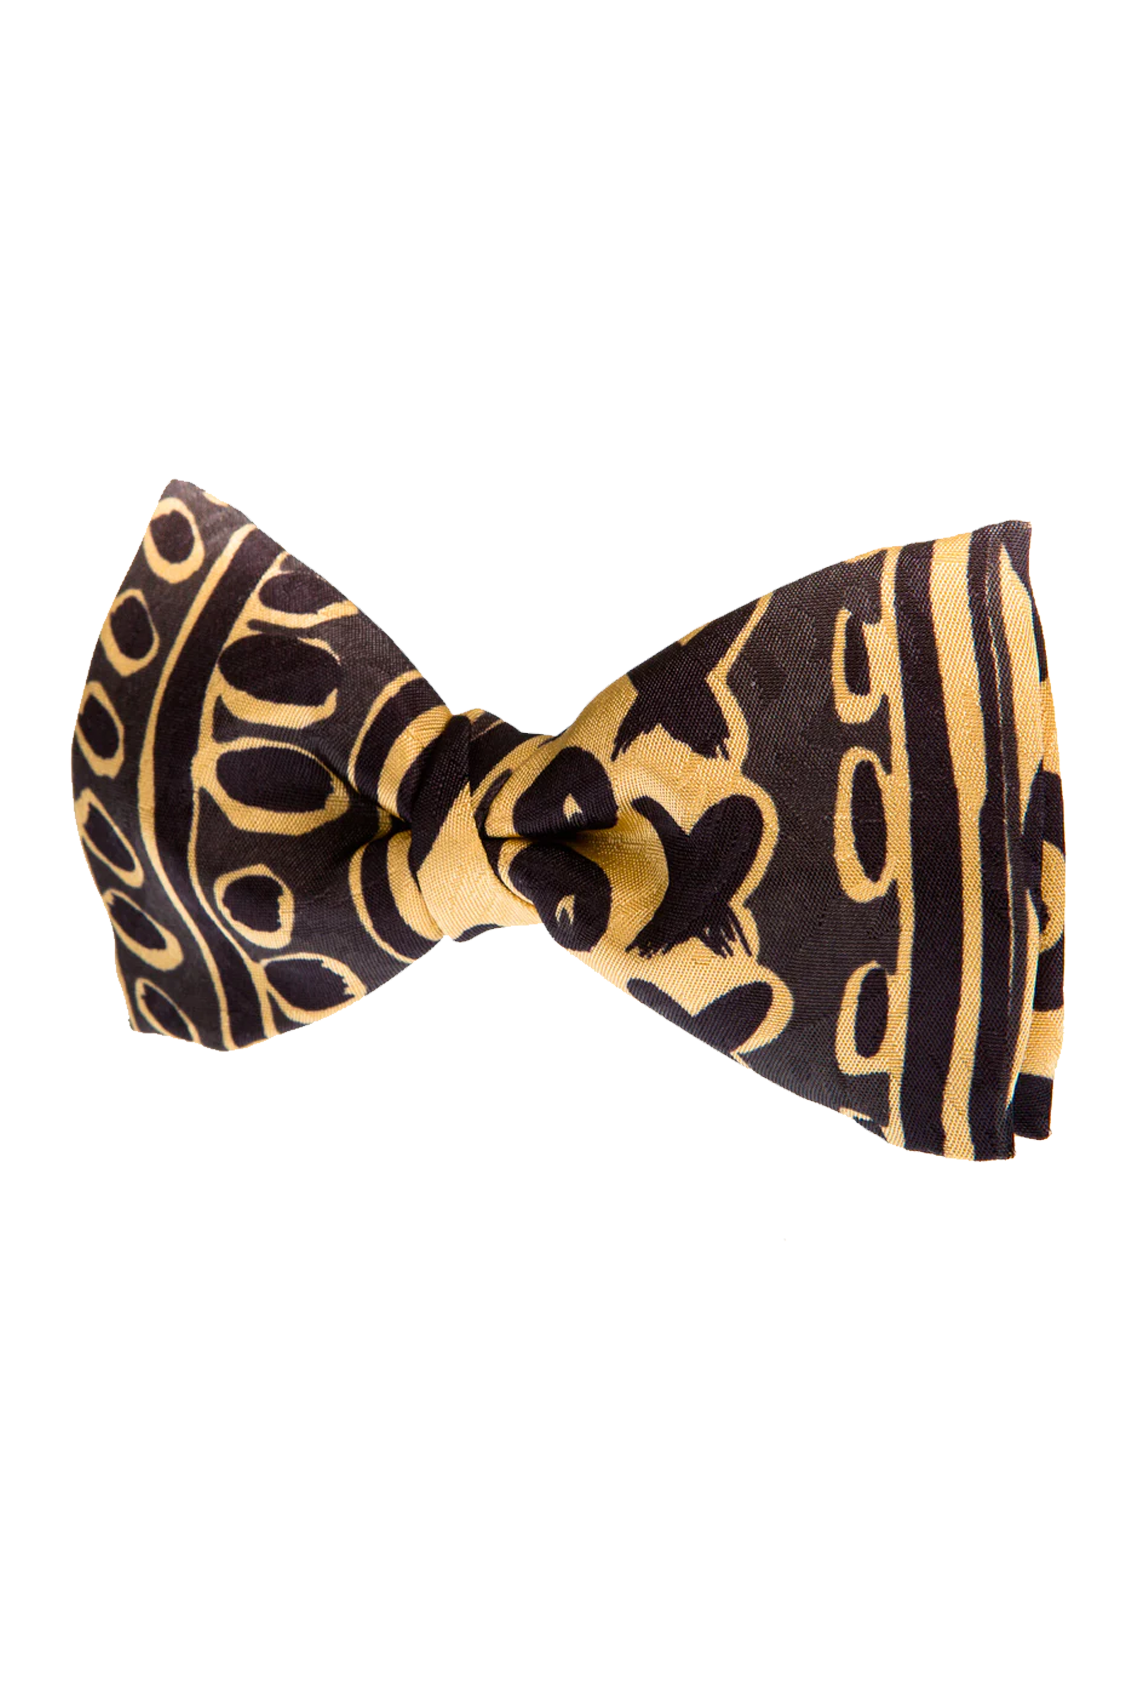 Black & Yellow "Bumble Bee" Bow Tie - Brand New